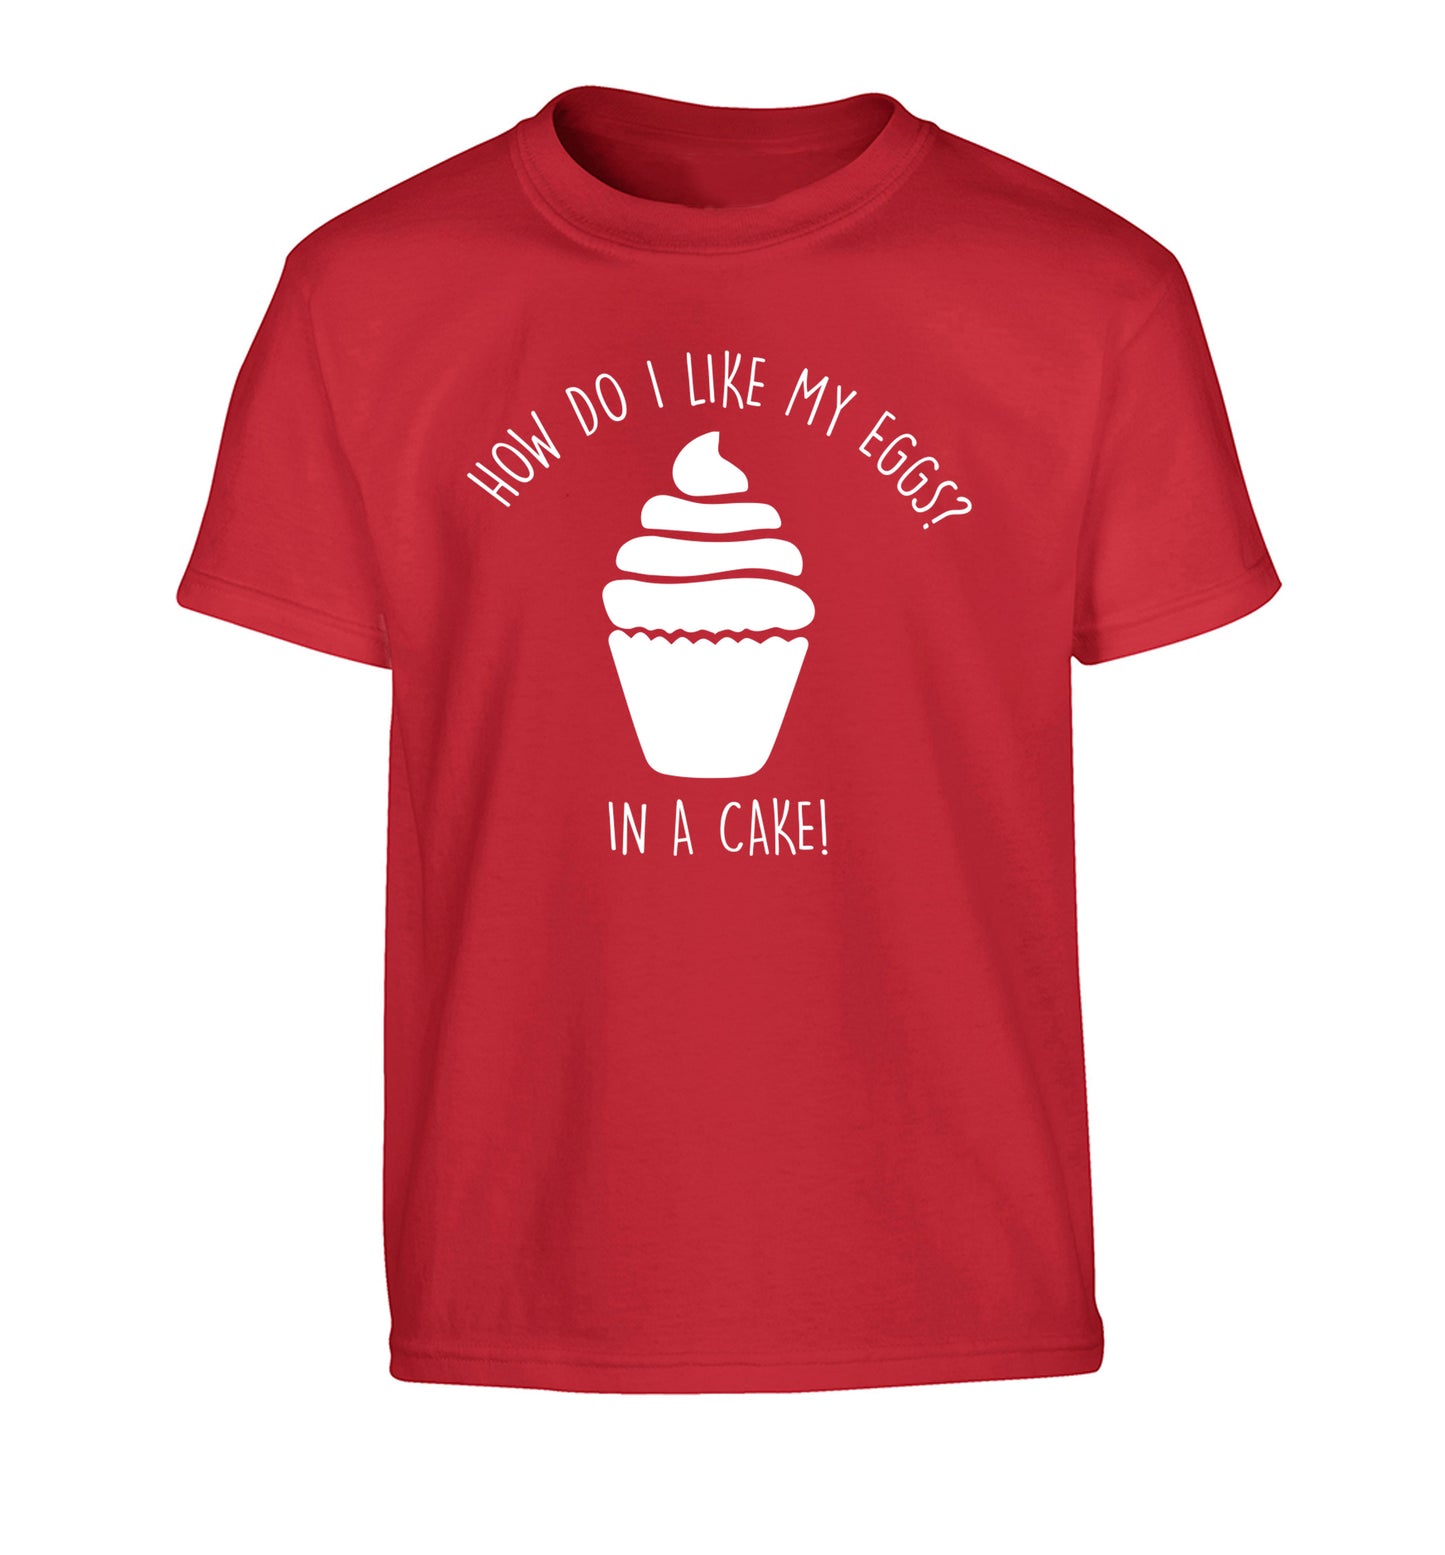 How do I like my eggs? In a cake! Children's red Tshirt 12-14 Years